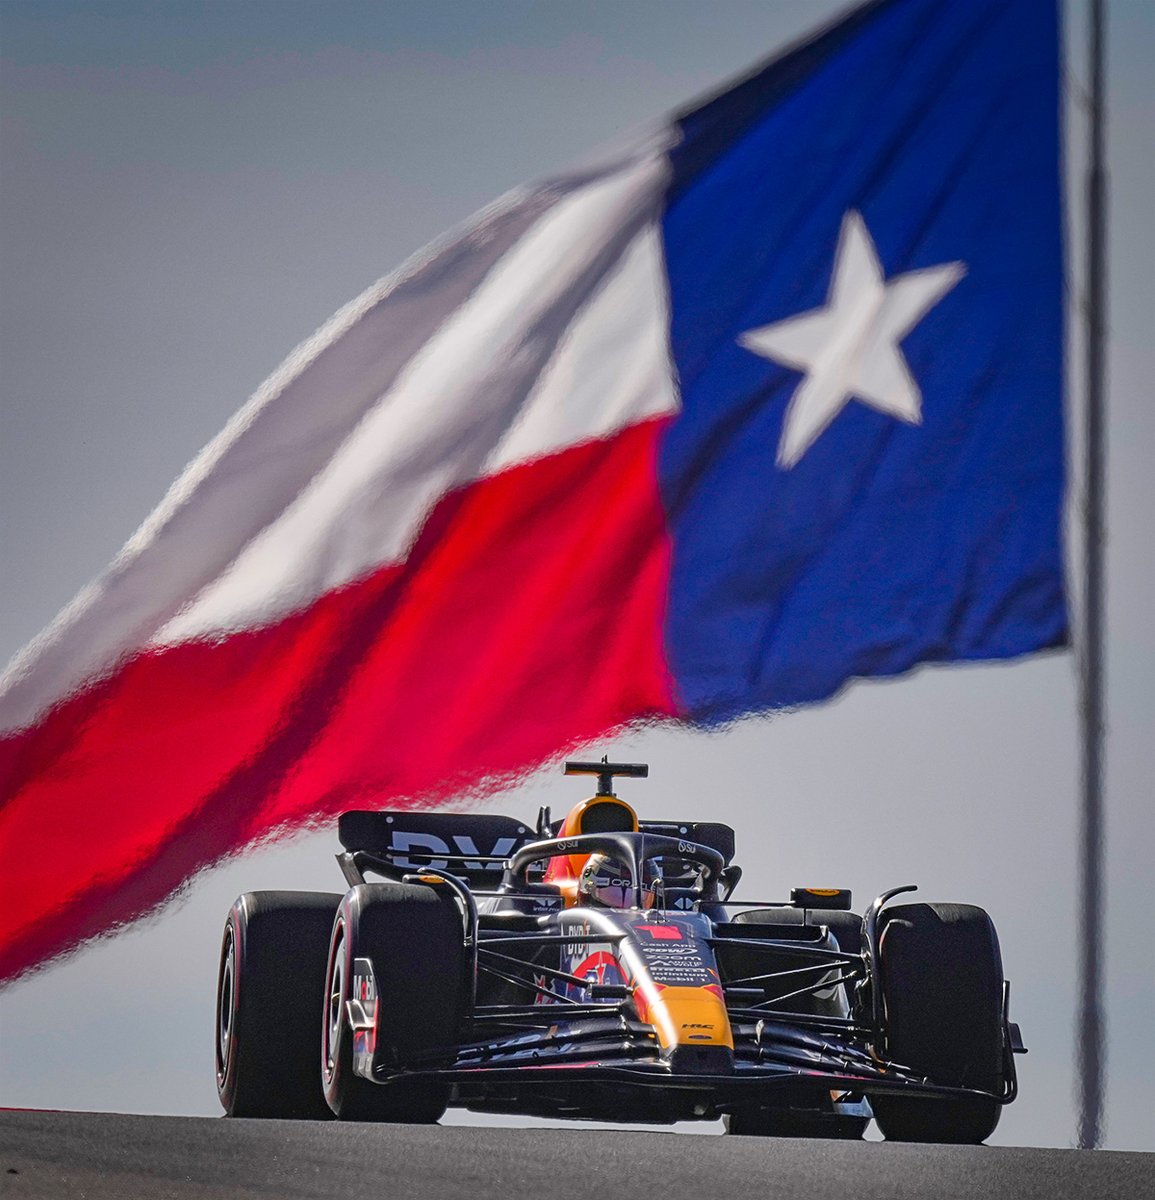 Red Bull driver Max Verstappen of the Netherlands flies over Turn 10 under a vast Texas flag during a Formula One U.S. Grand Prix practice session in Austin, Texas. #sonyalpha #sony600mm #alpha1 #texas #formula1 #f1 #racing #cars #cota  #speed #austin #circuitoftheamericas #r ...